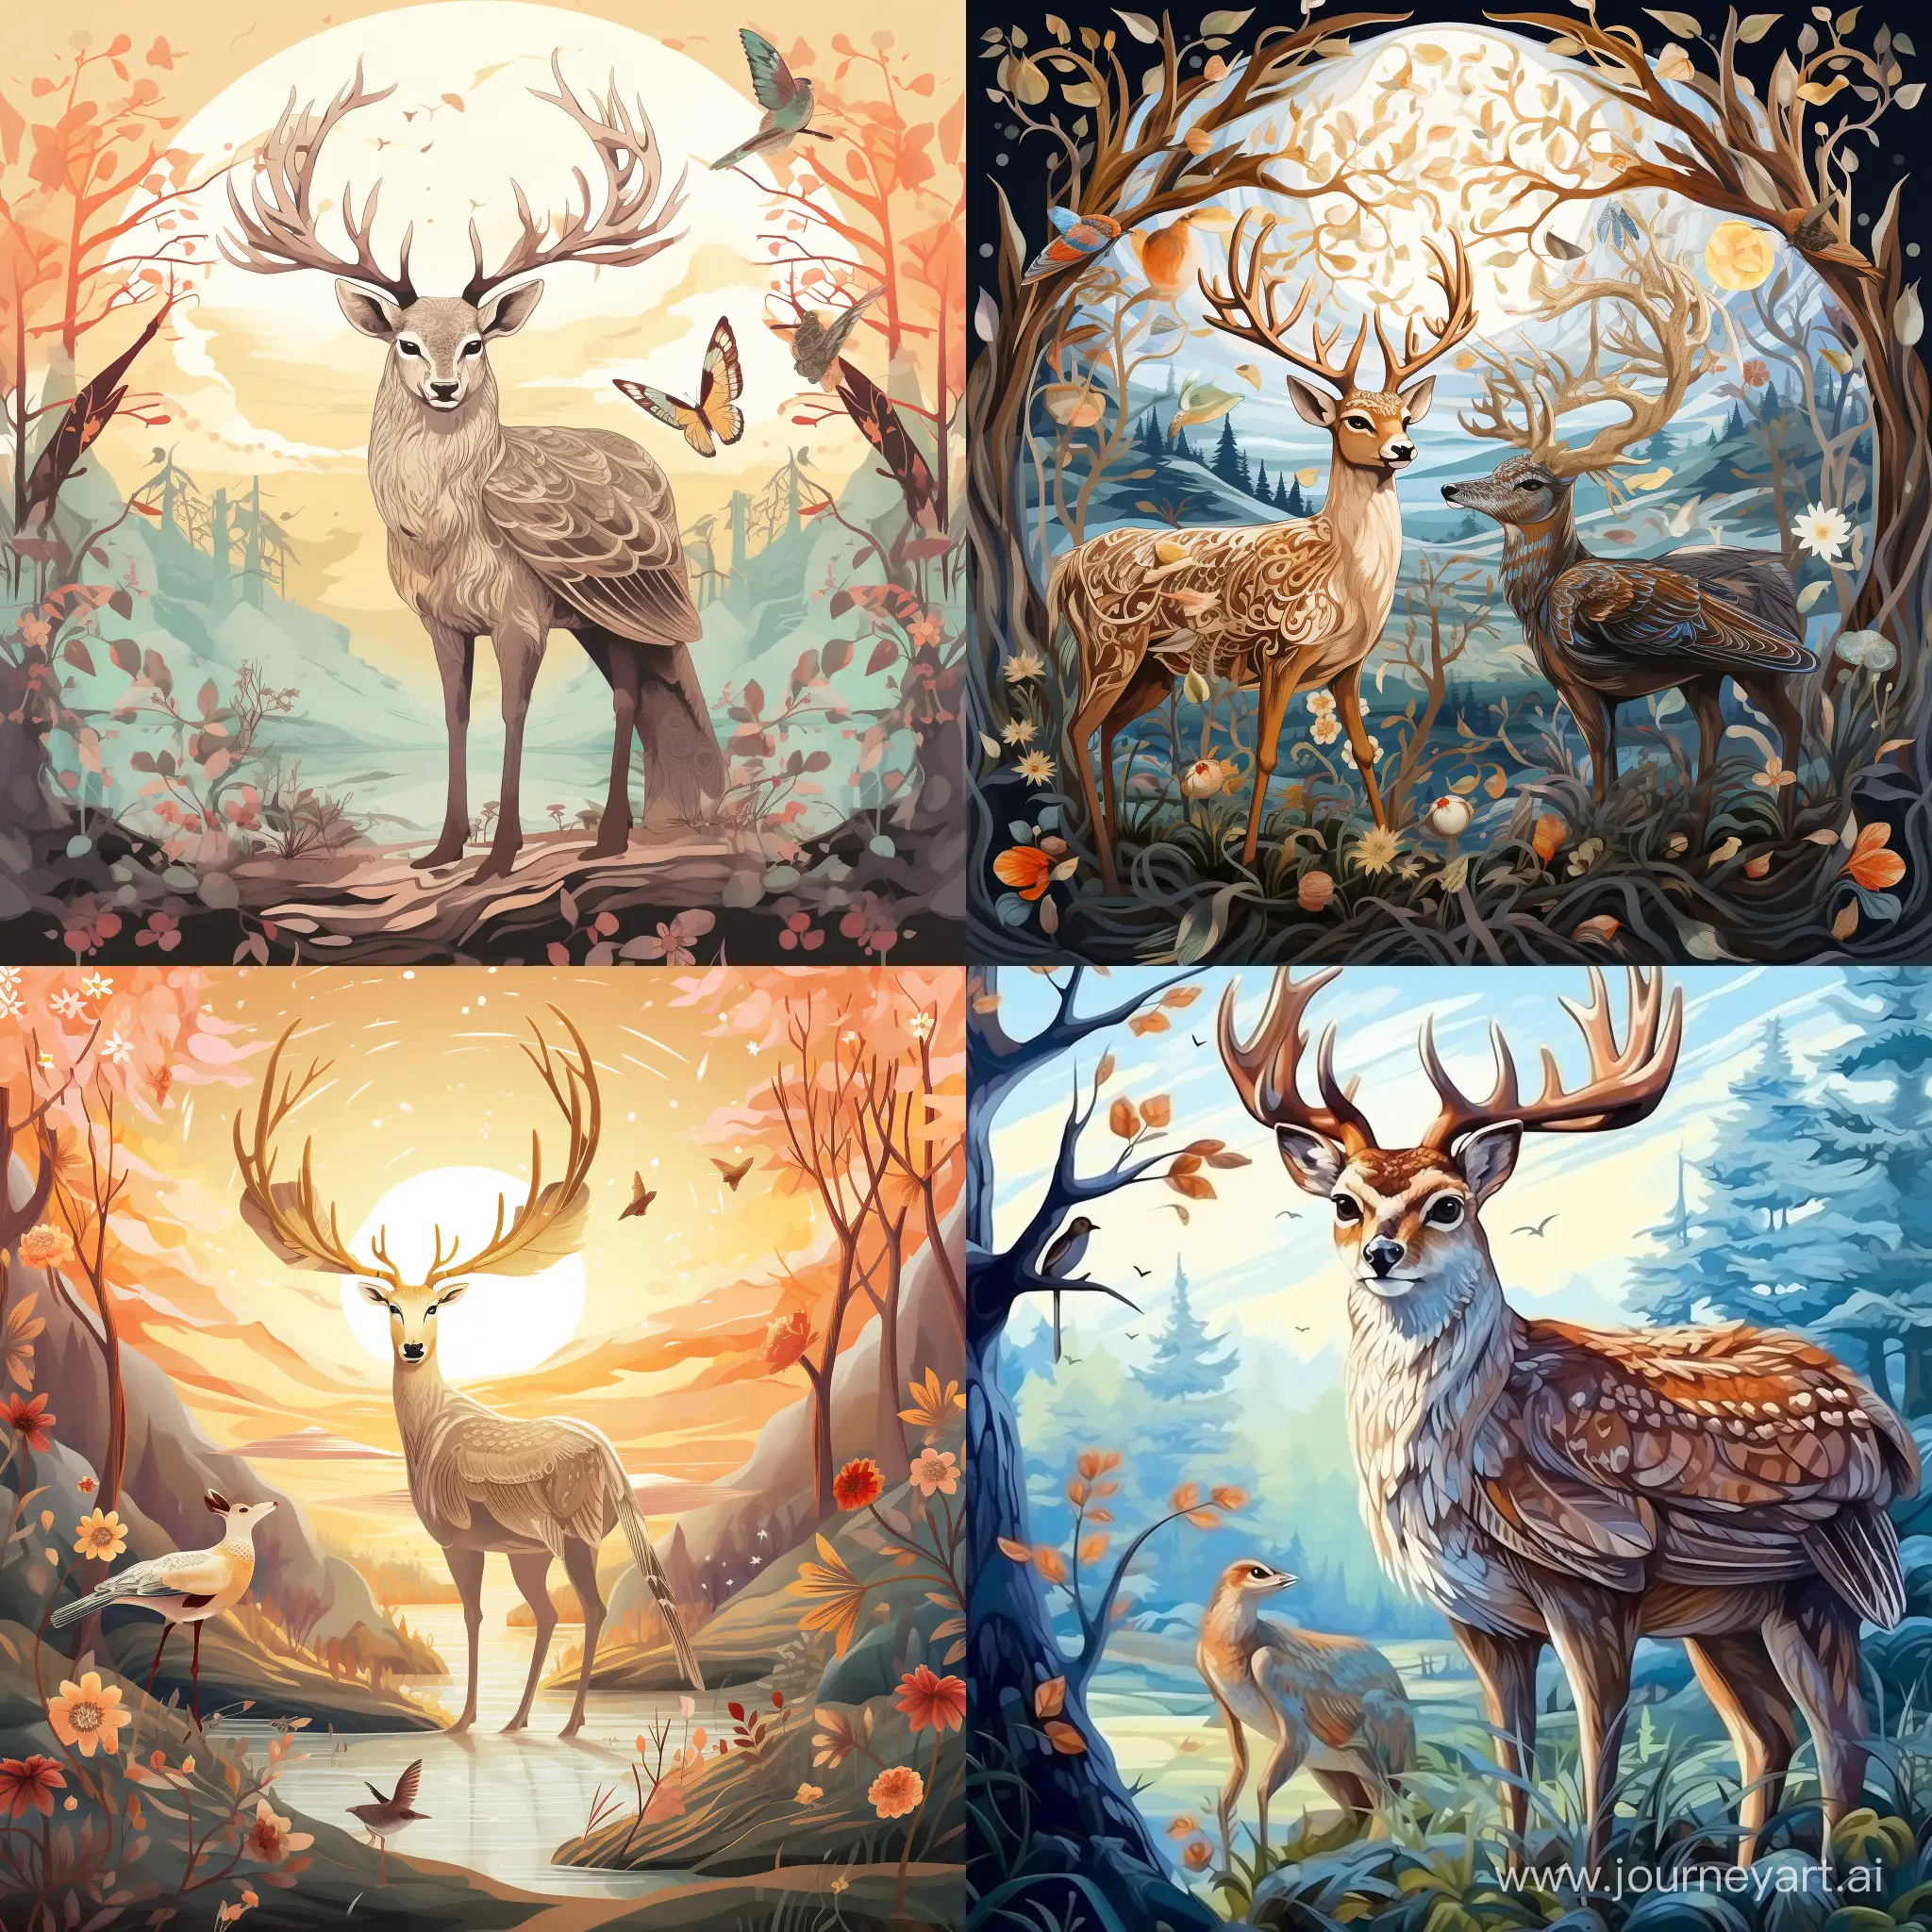 illustration for fairytale, old owl and graceful deer in a land of endless wonders, sunny day